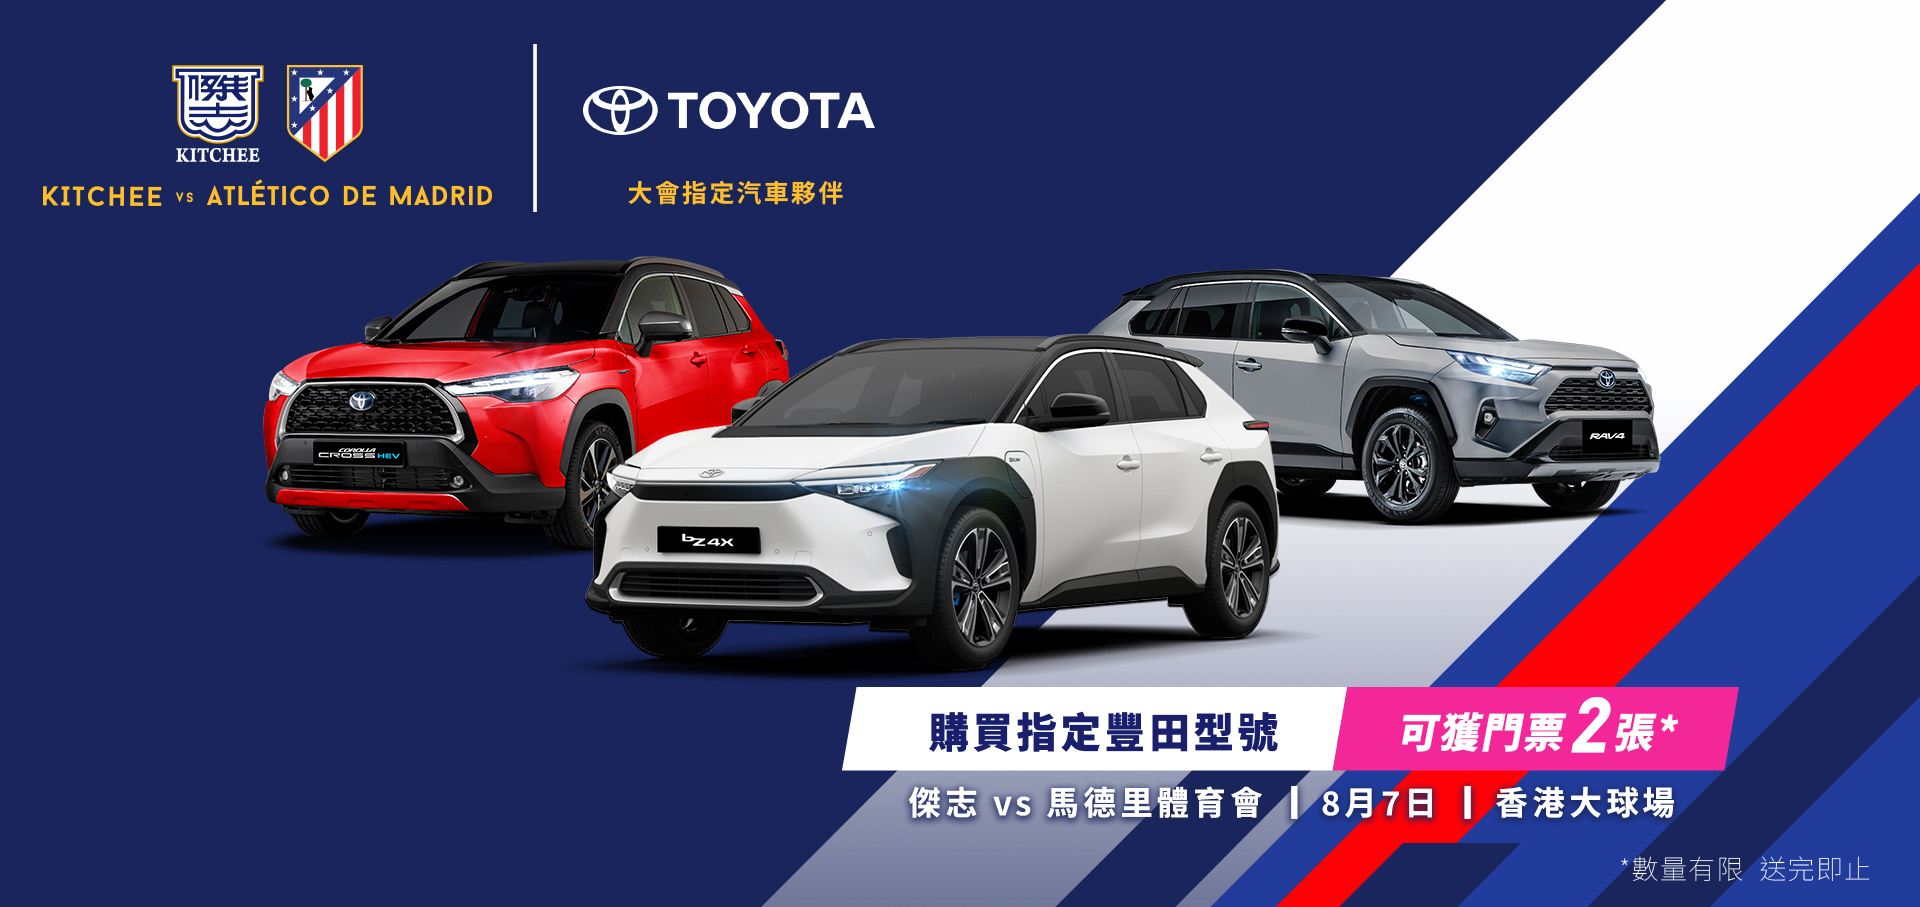 KITCHEE 🆚 ATLÉTICO DE MADRID｜TOYOTA's Dedication to Local Sports Events